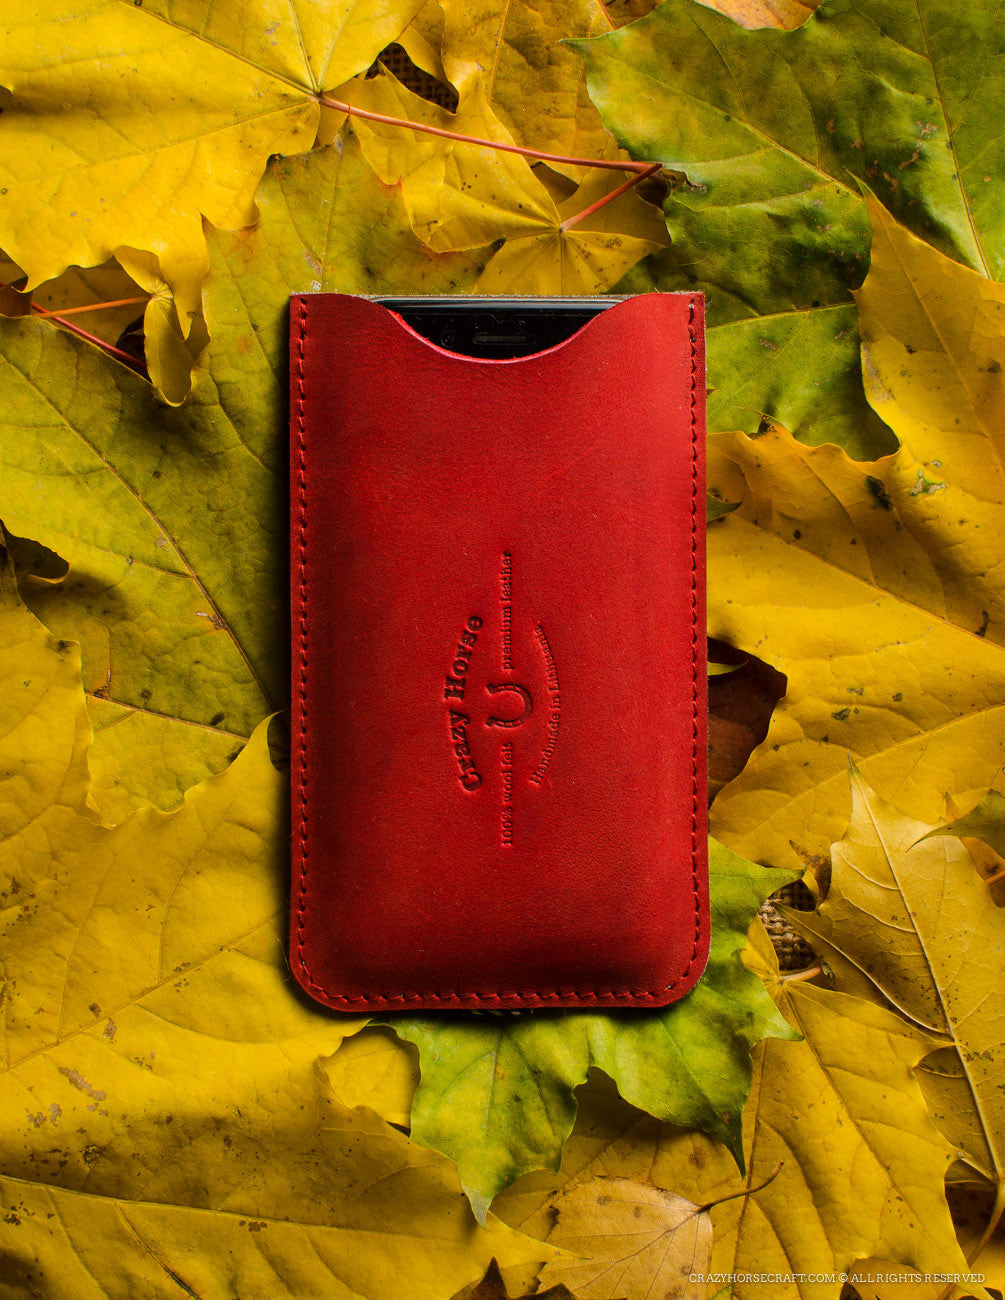 Leather Red Iphone 6s case wool felt with cardholder